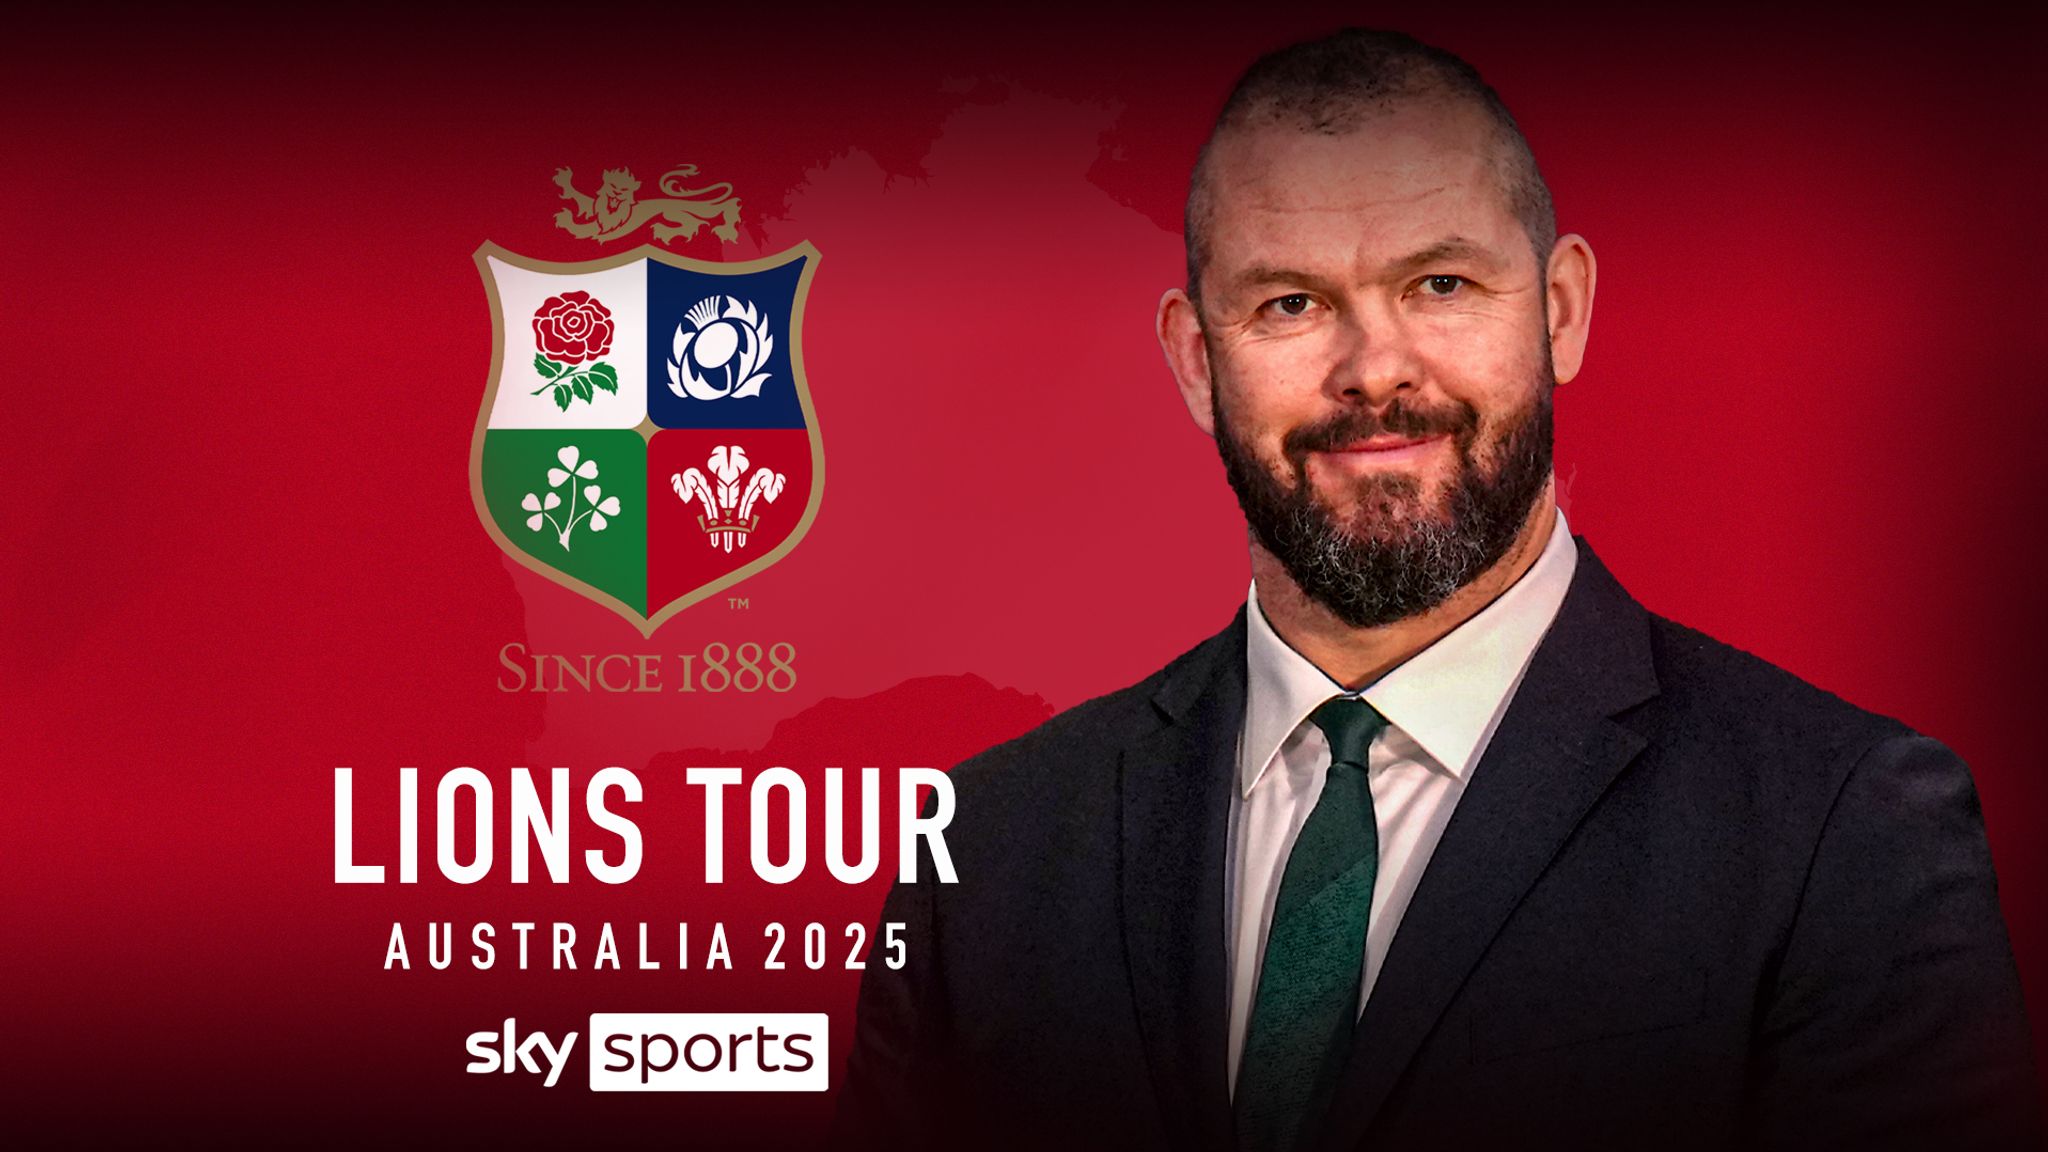 Why have the British and Irish Lions chosen Andy Farrell to lead them